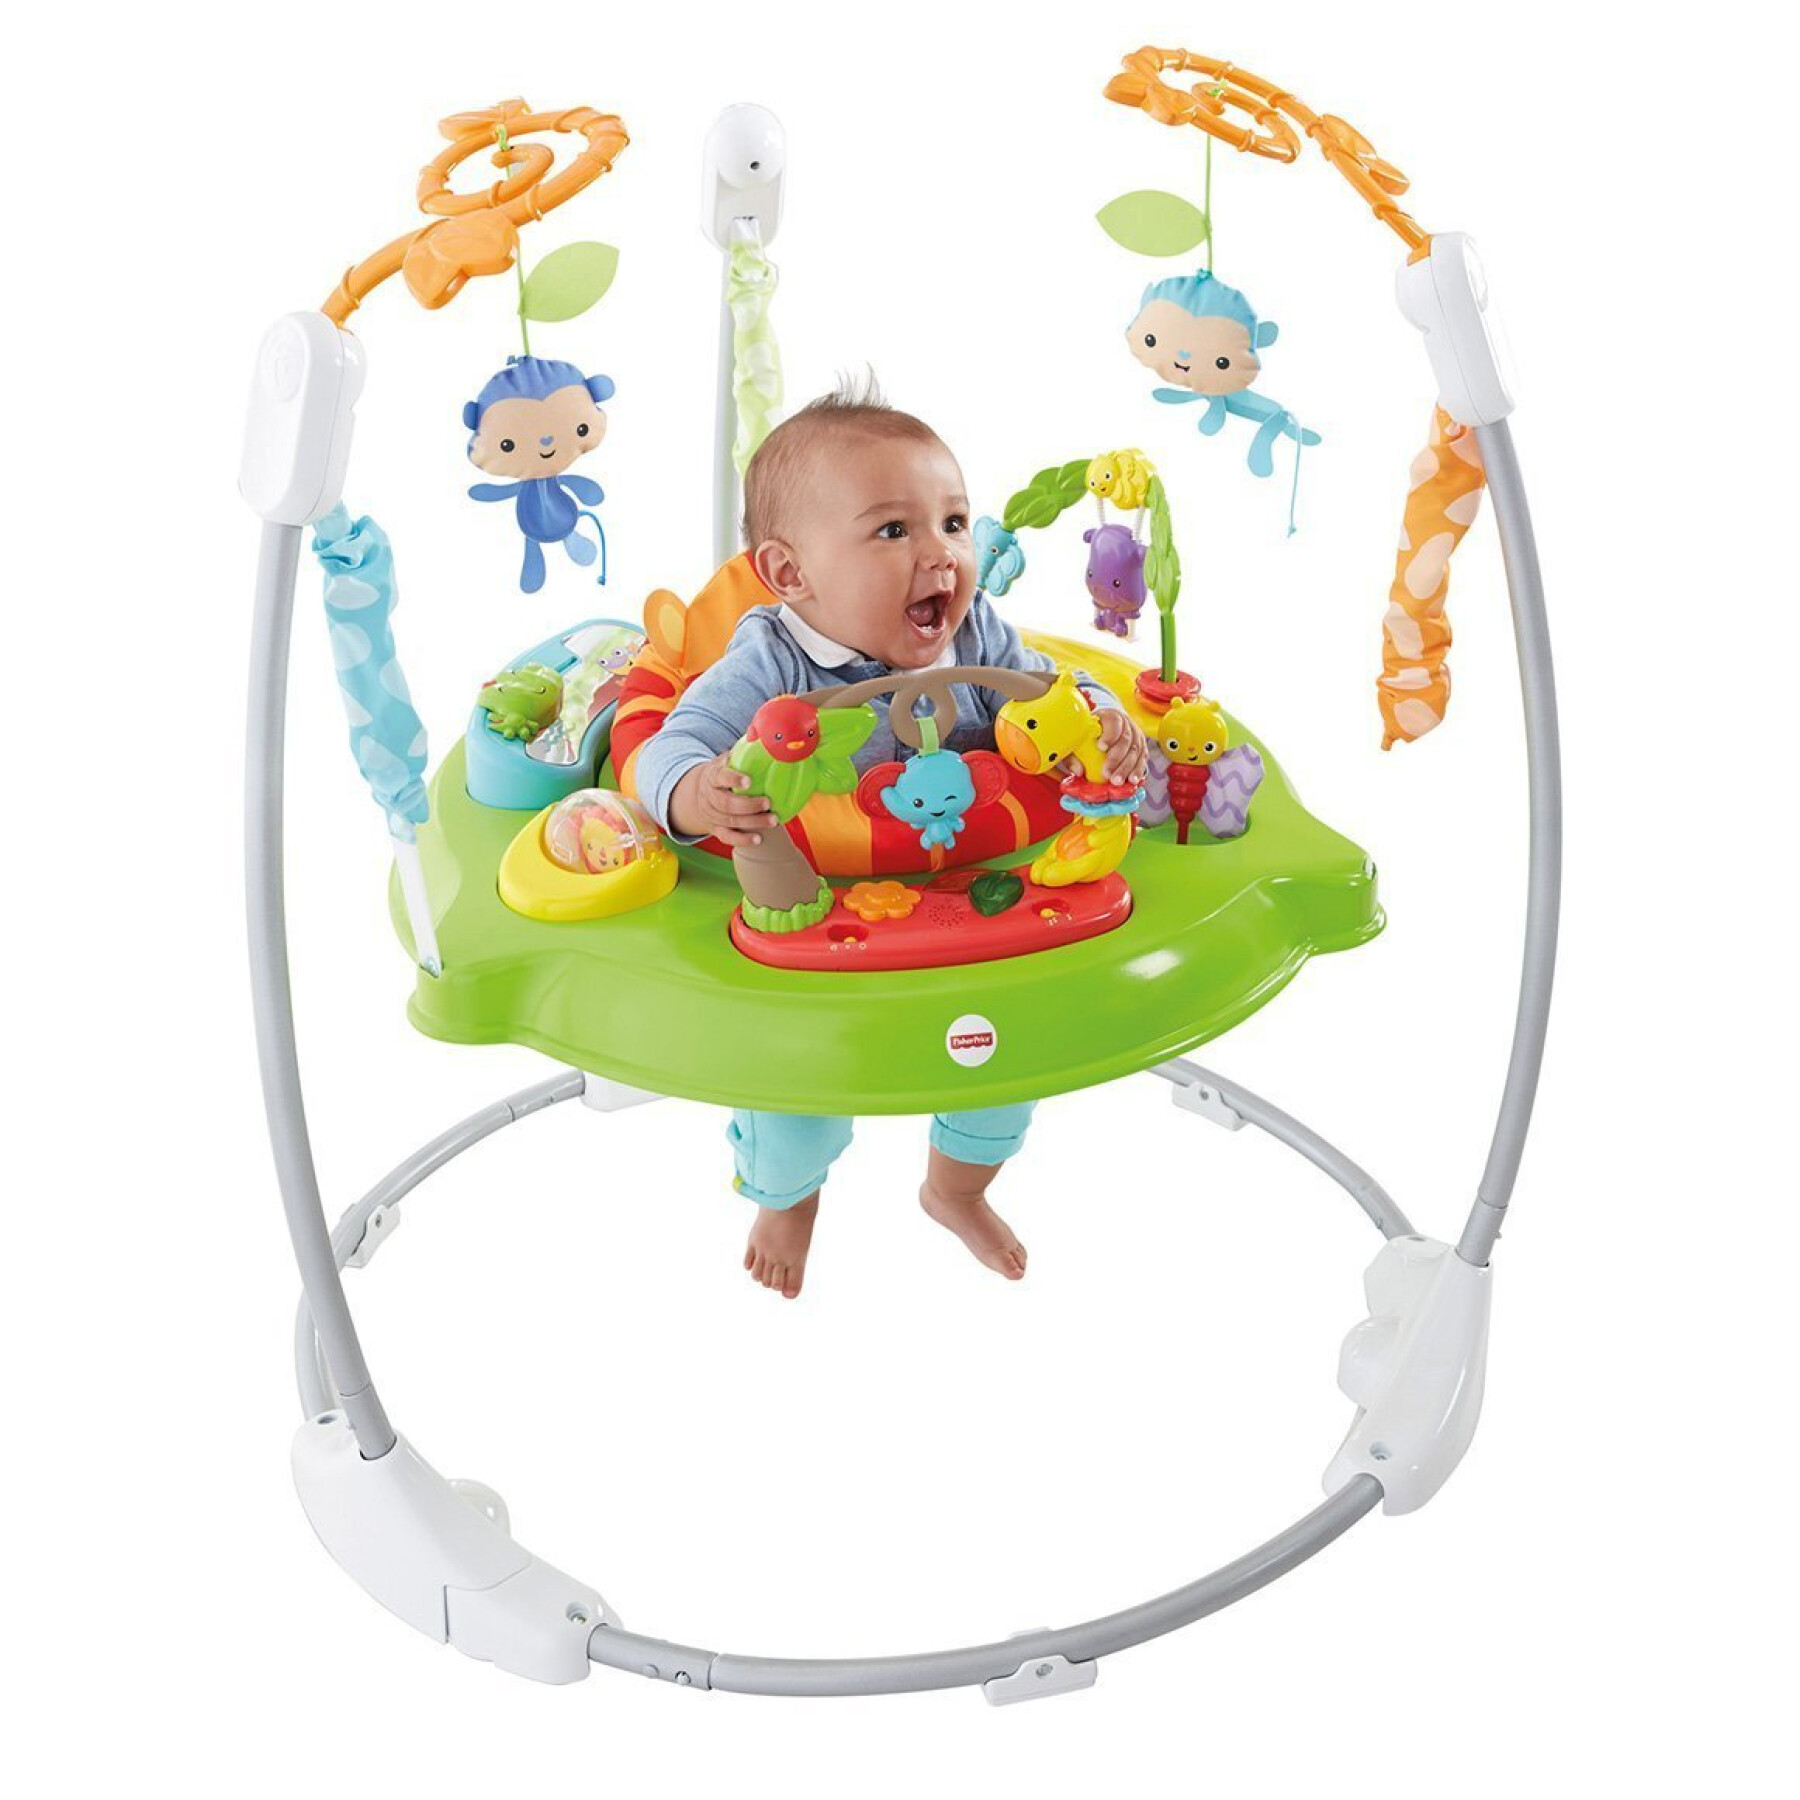 Early-learning games with sound Mattel France Fp Jumperoo Jungle